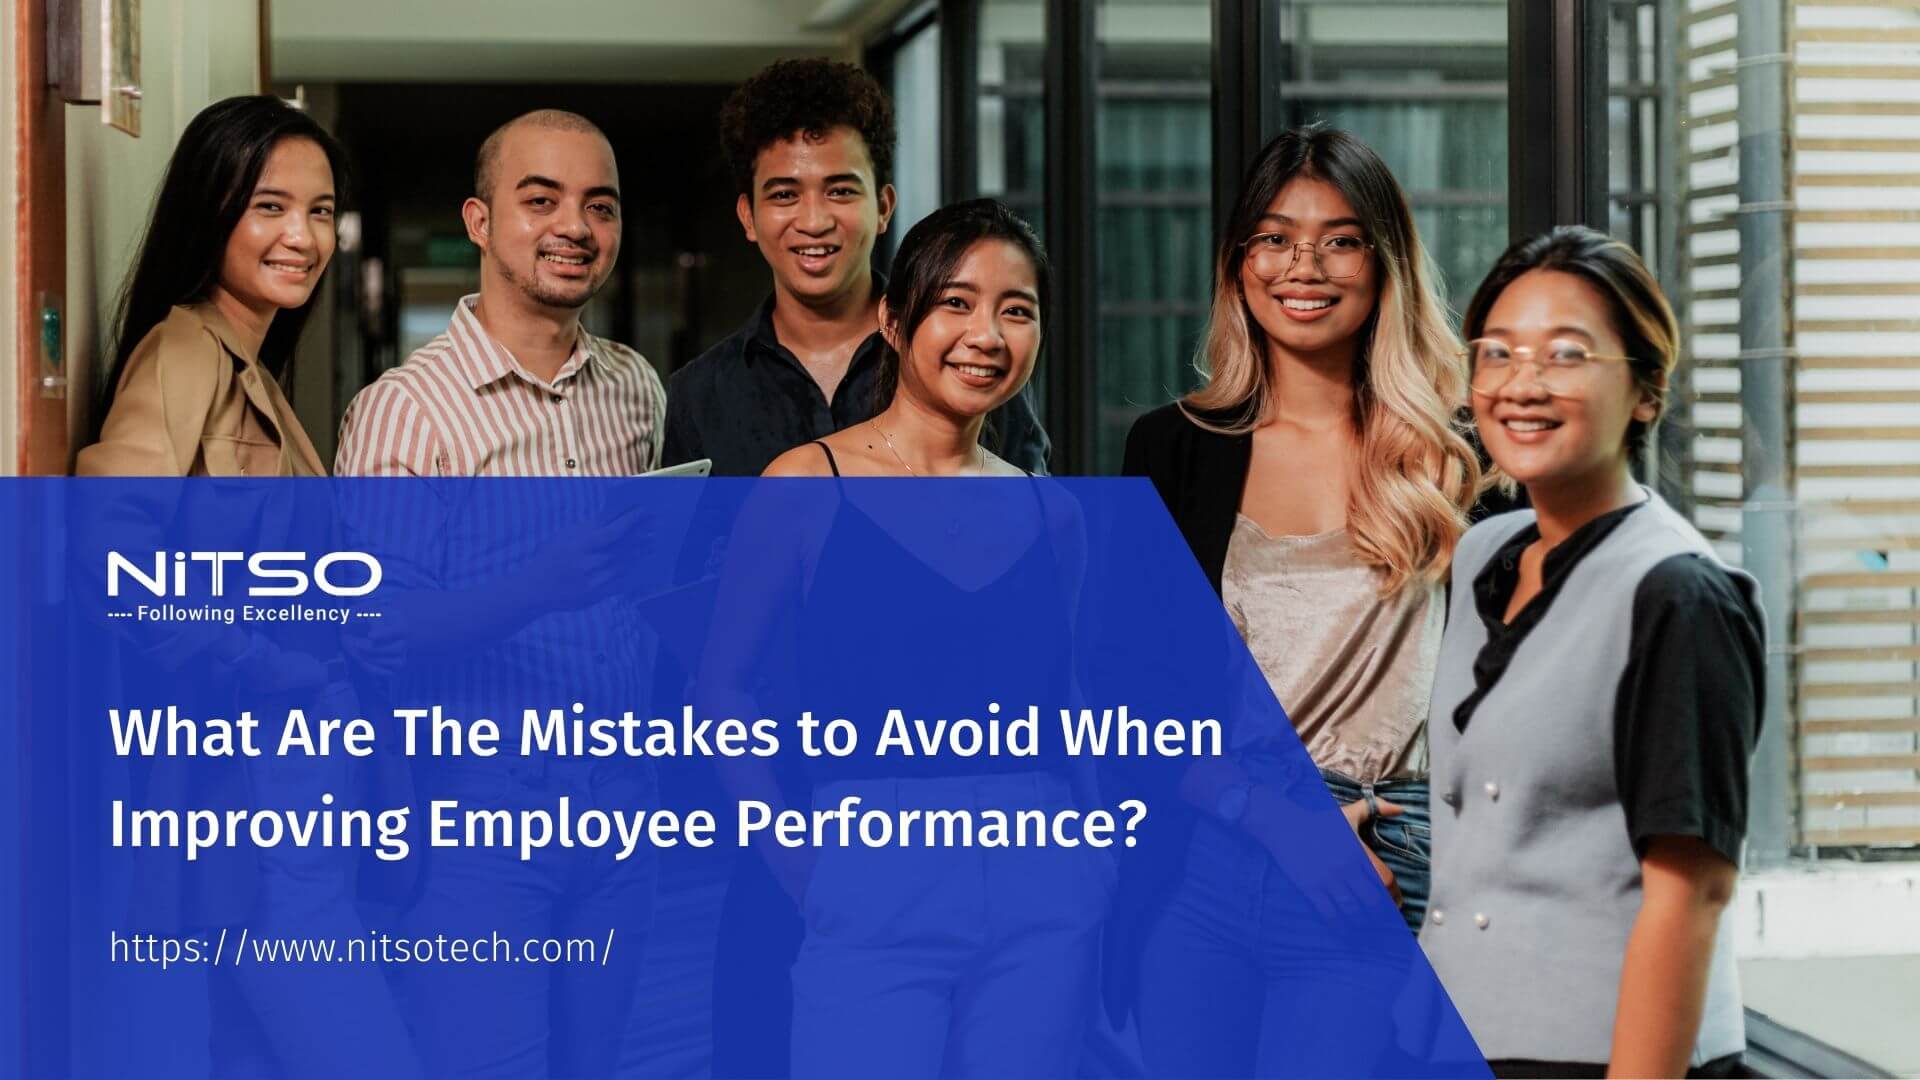 What Are The Mistakes to Avoid When Improving Employee Performance?